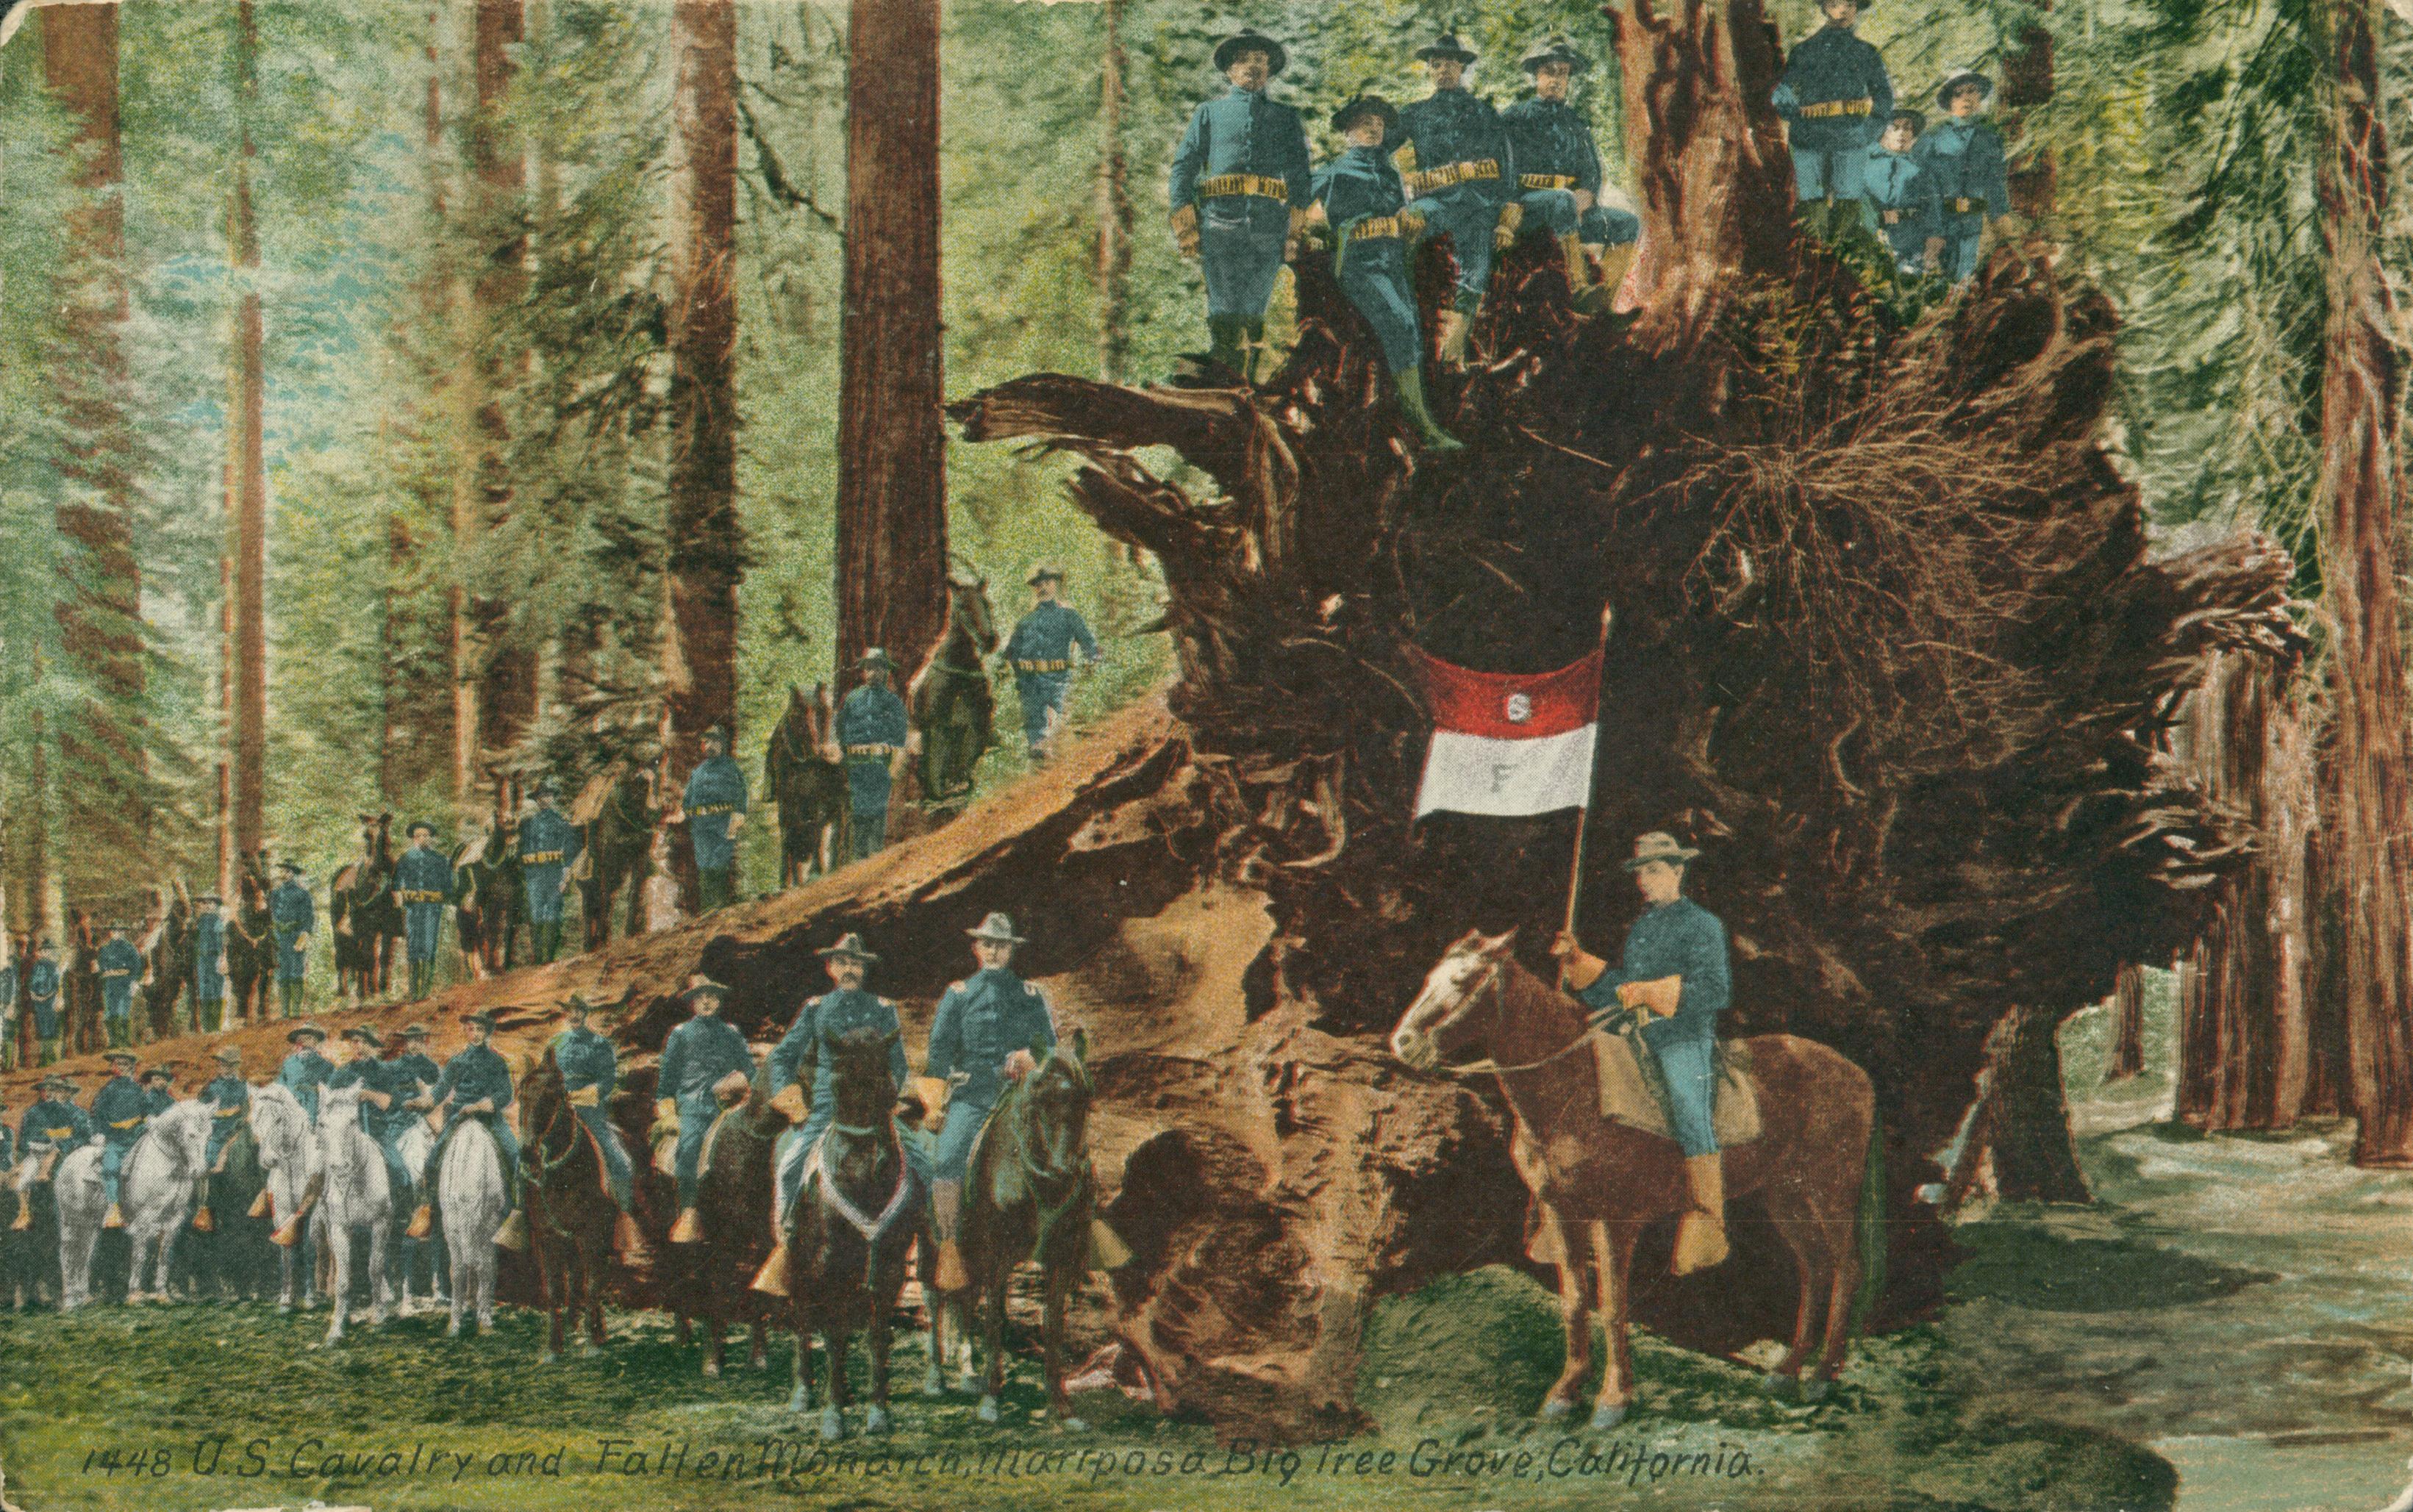 Shows a regiment of the United States cavalry and their horses posed on and around the Fallen Monarch